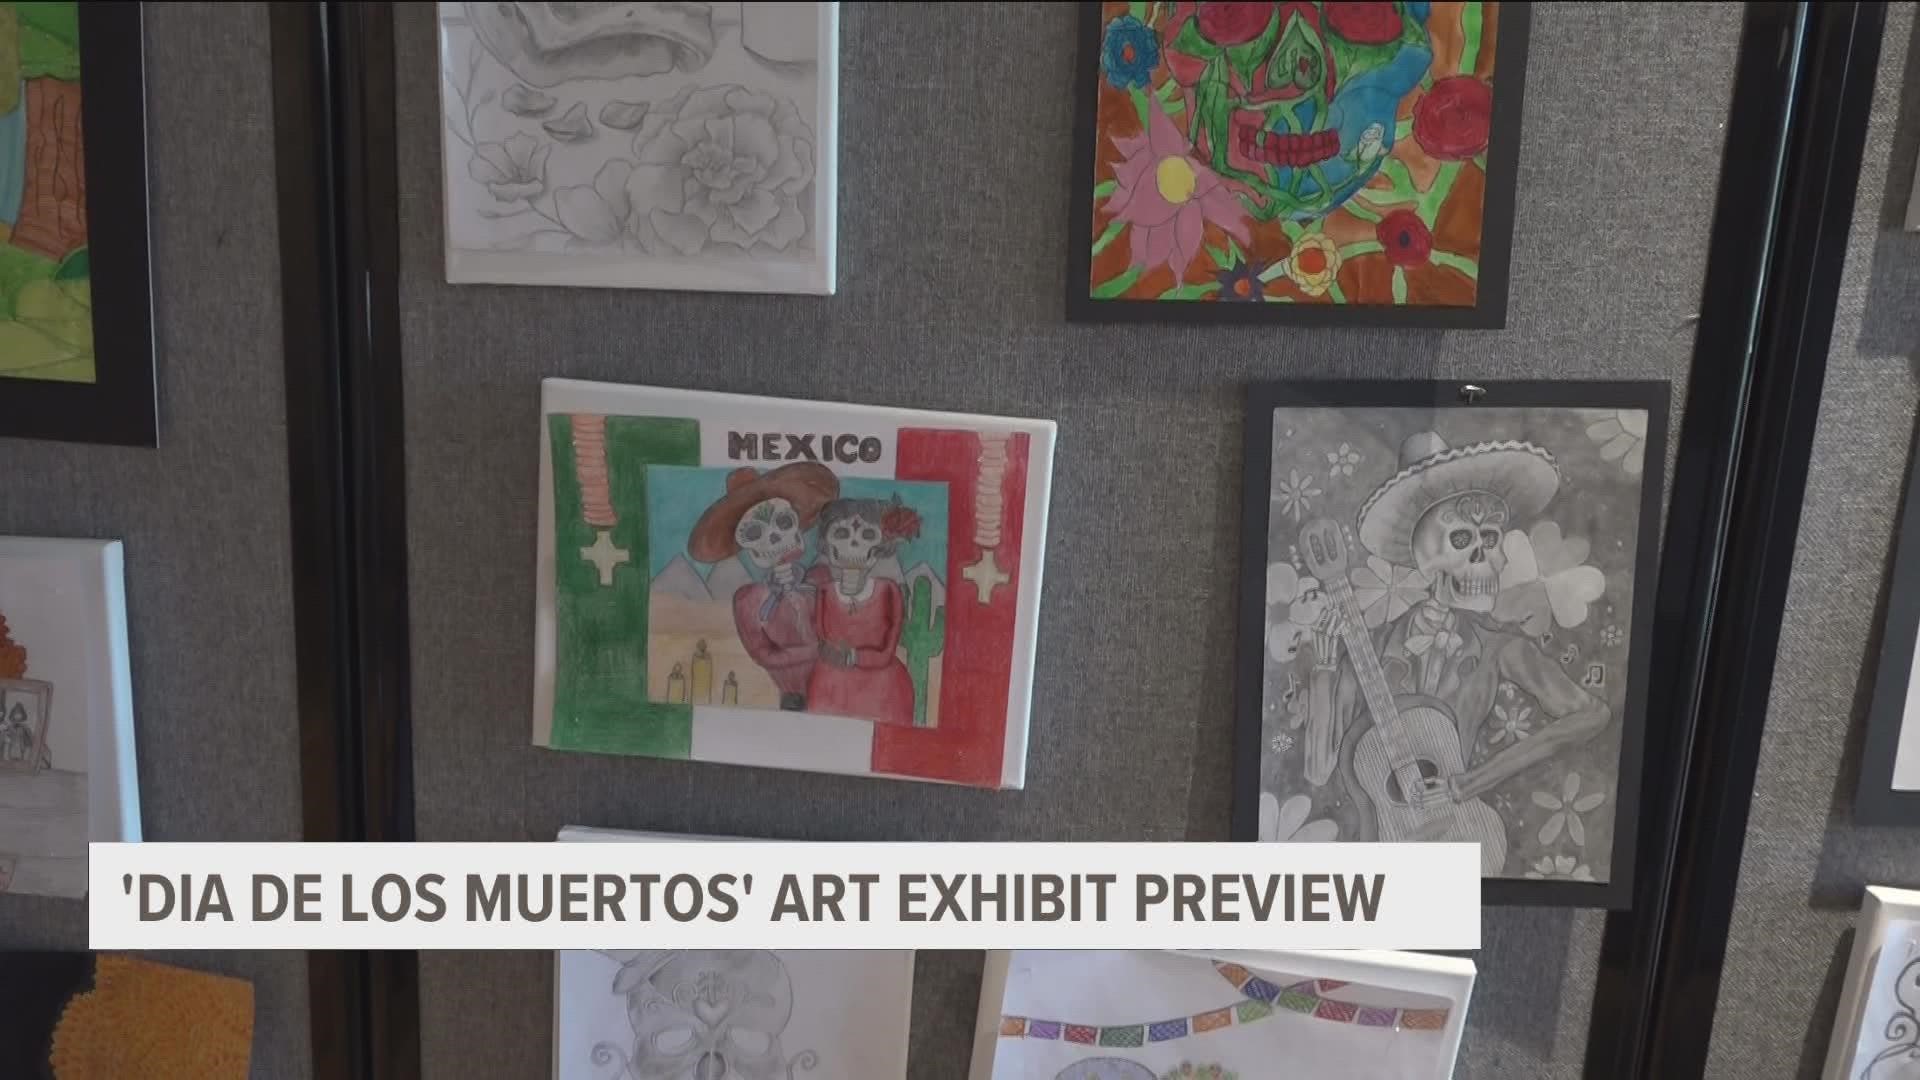 With more than 100 entries, the art exhibit has it's largest collection yet.